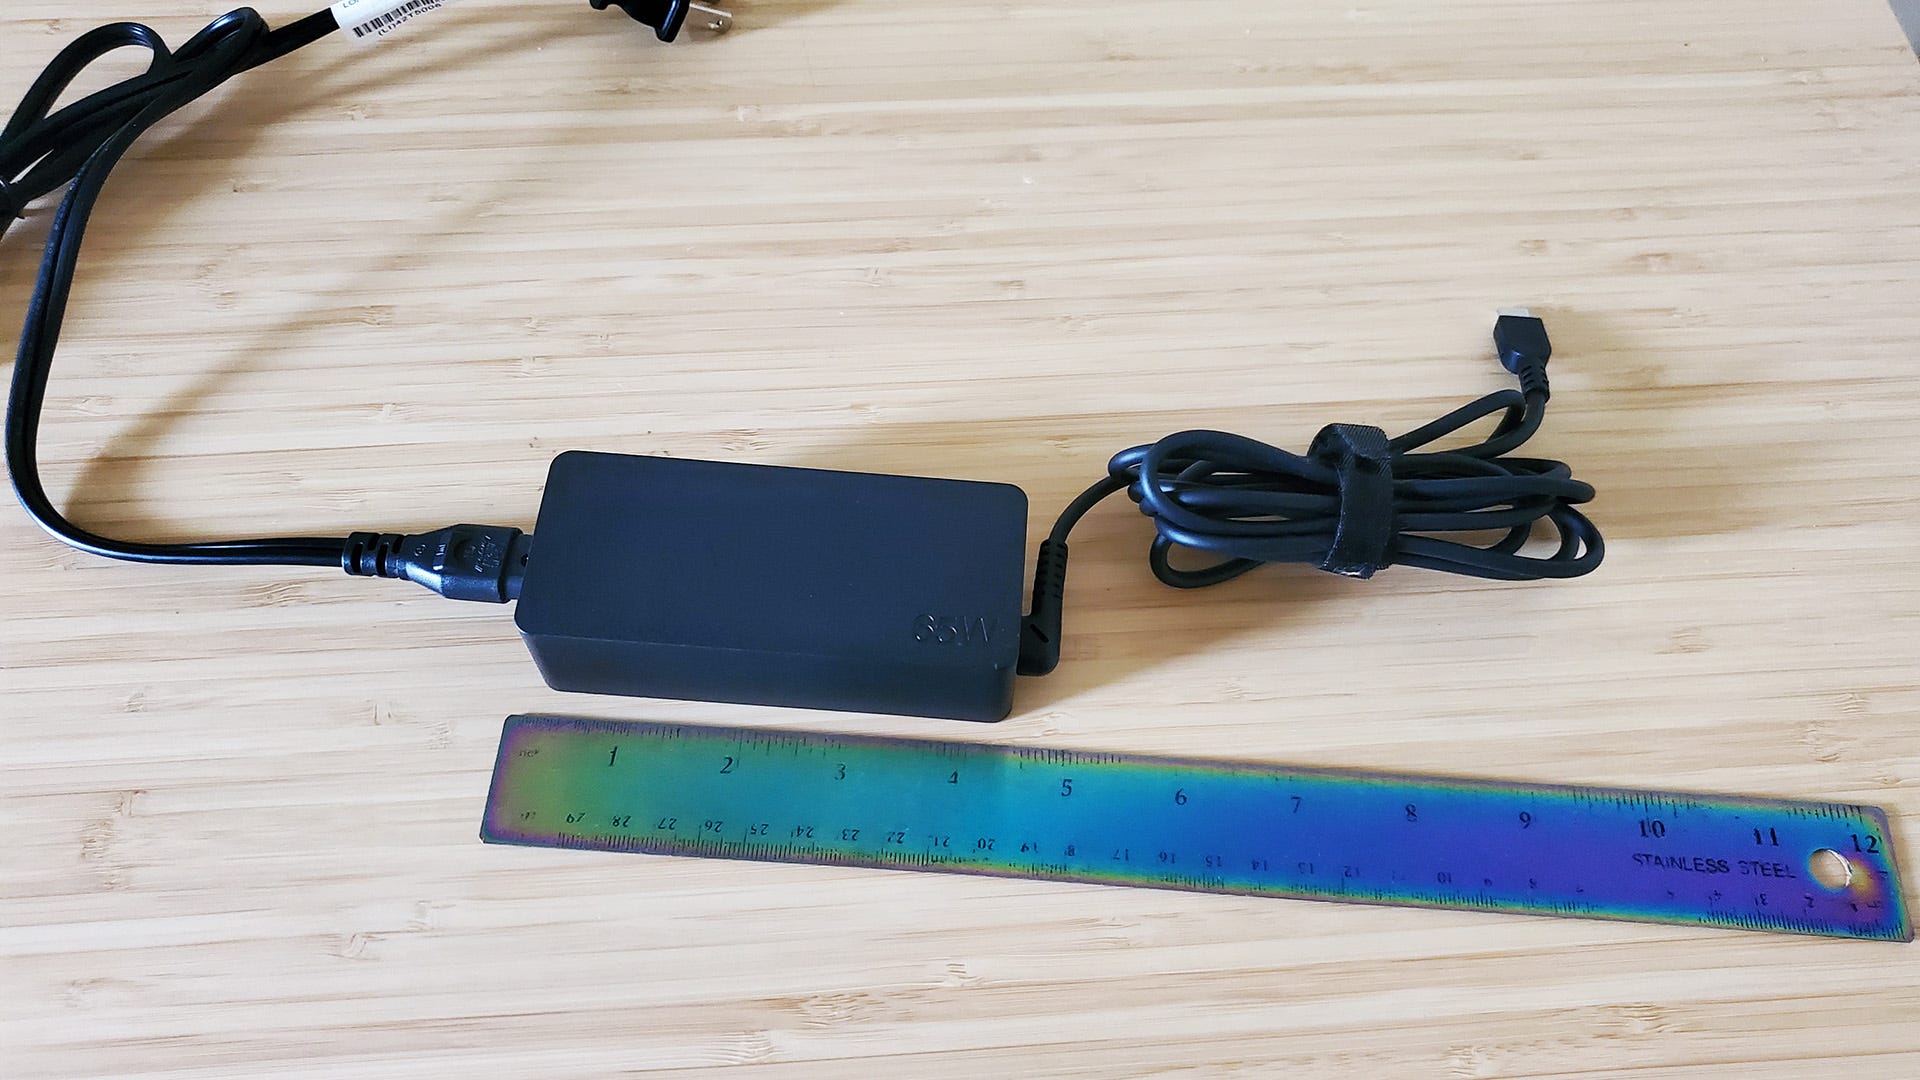 The Lenovo ThinkPad X1 Carbon's 65-watt charger next to a ruler on a desk.